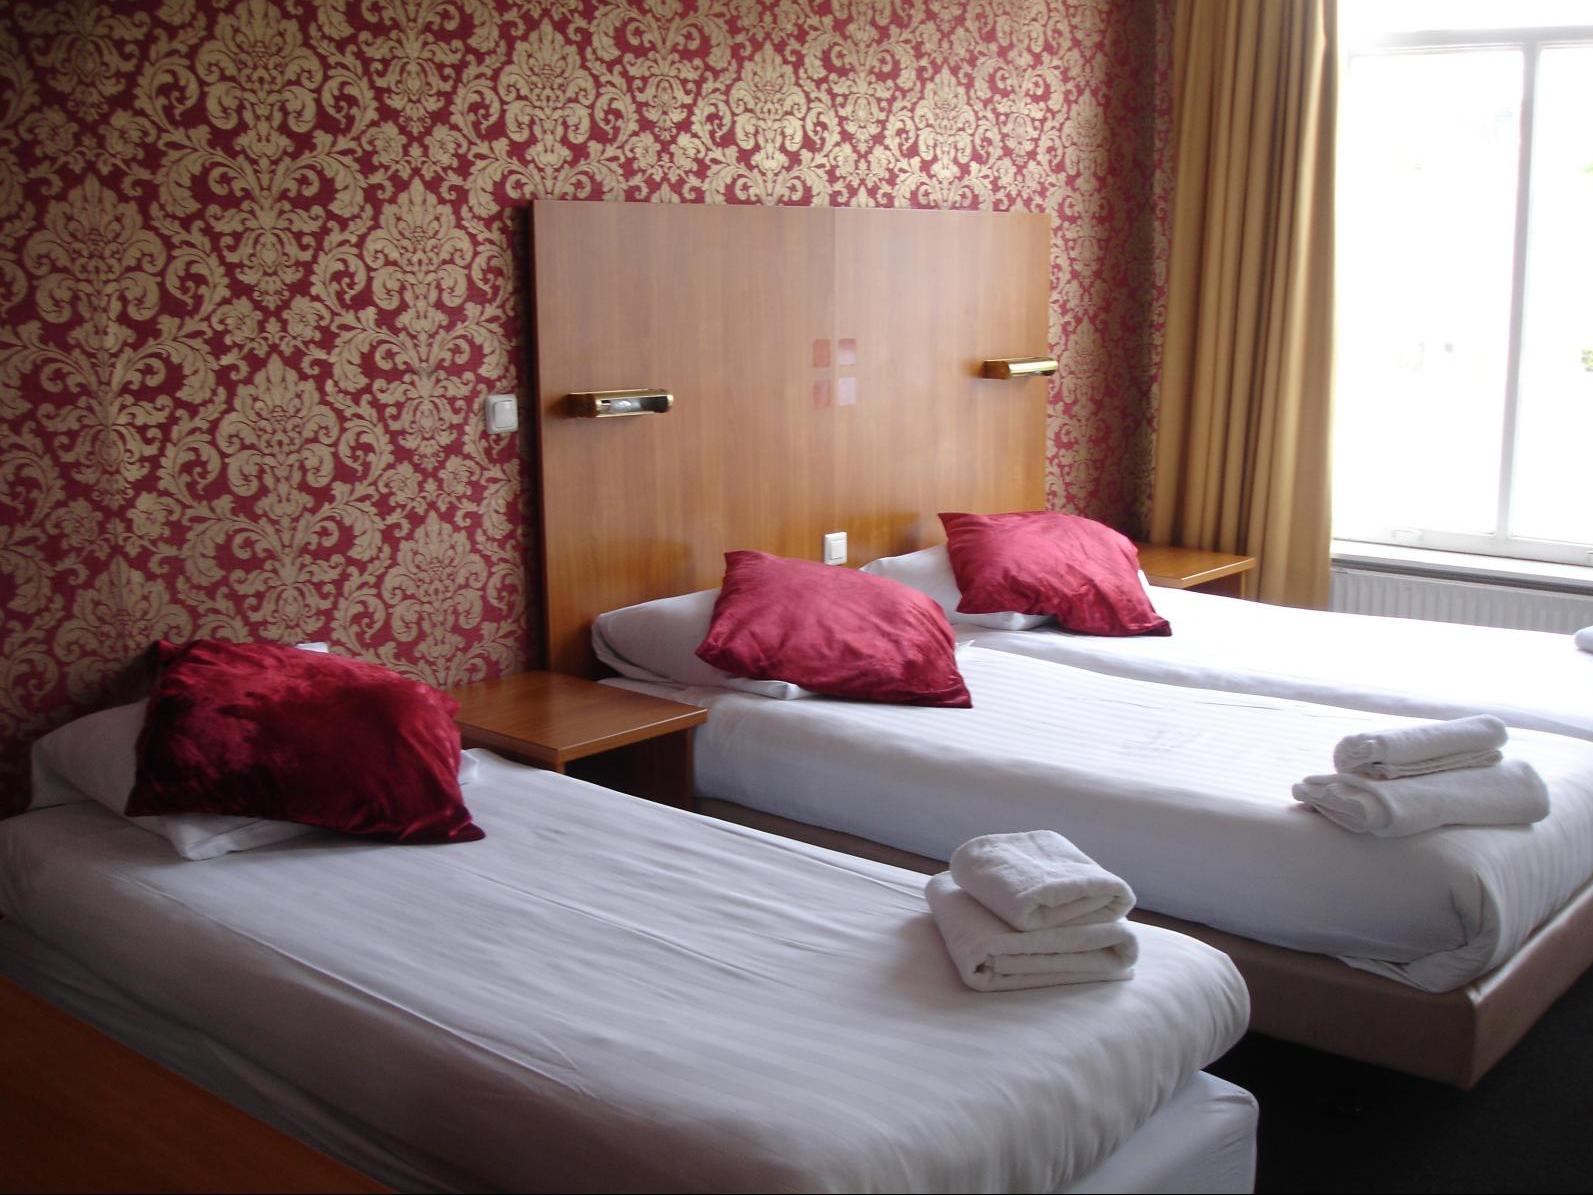 Triple room with private shower/toilet, TV, radio, hairdryer and phone.